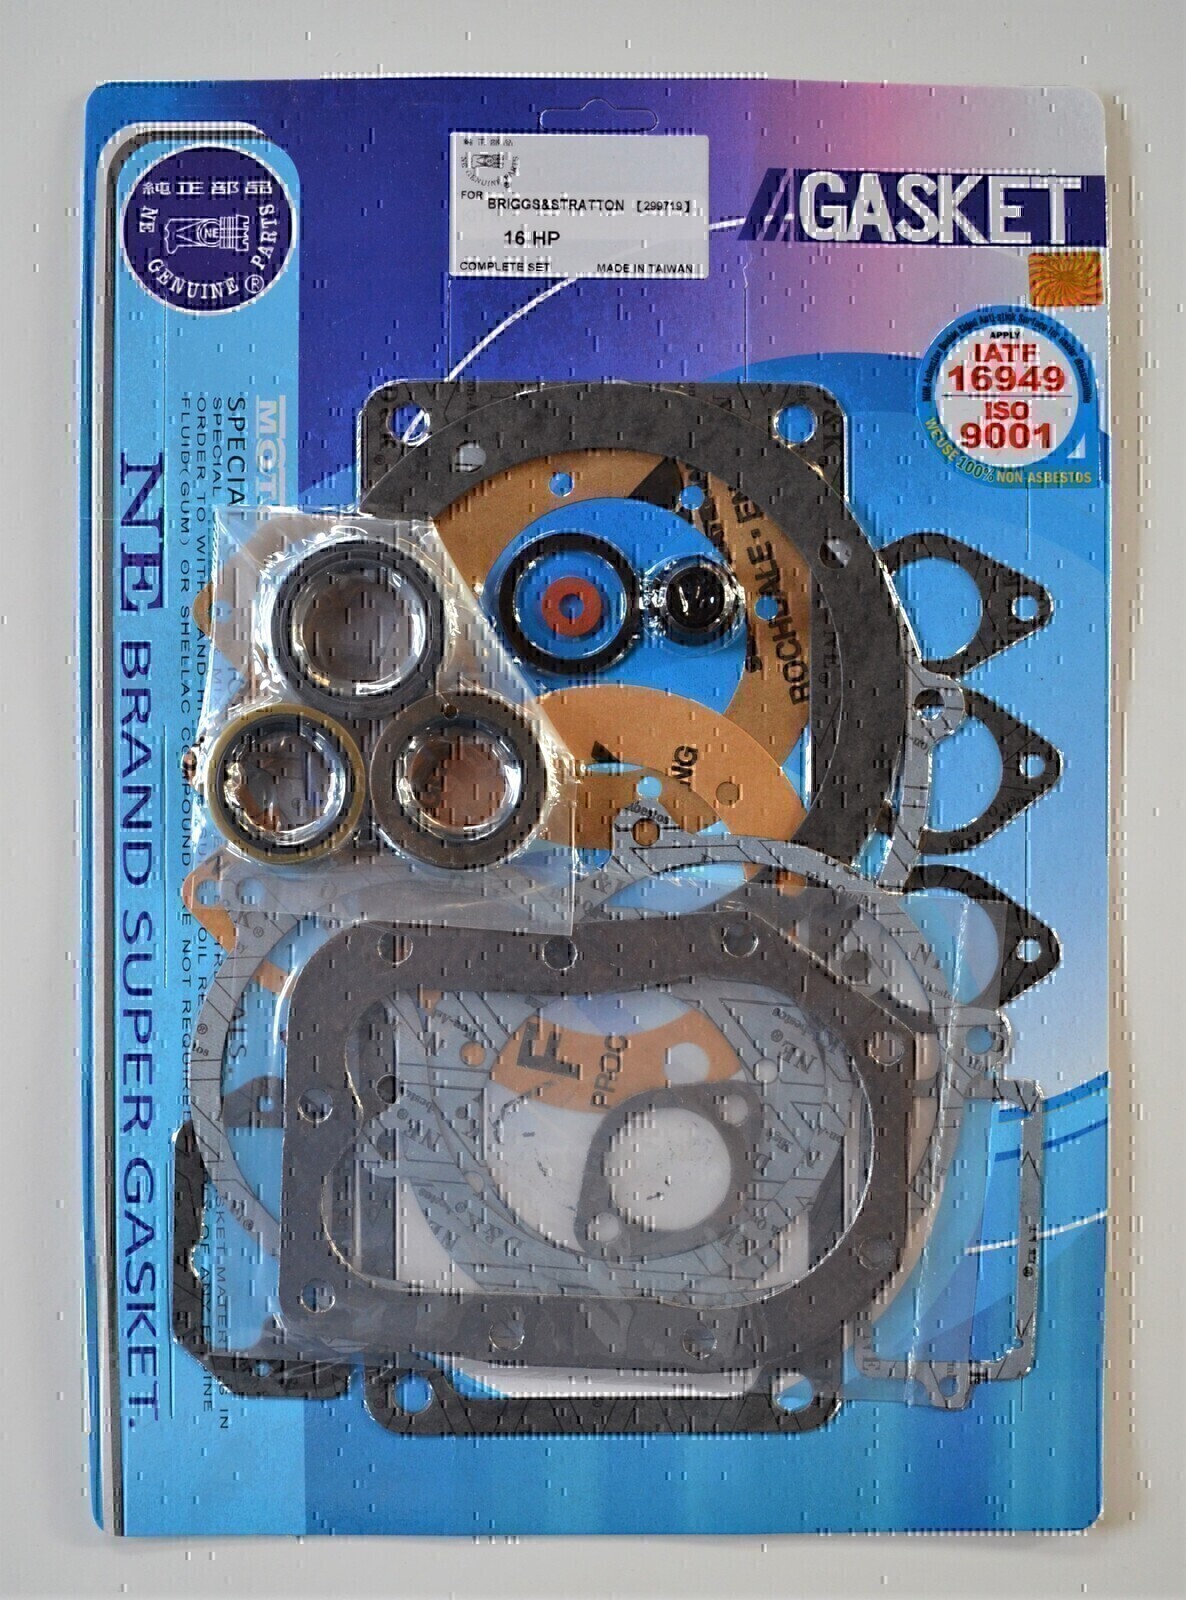 COMPLETE GASKET KIT FOR BRIGGS & STRATTON 16 HP ALL YEARS # 299719